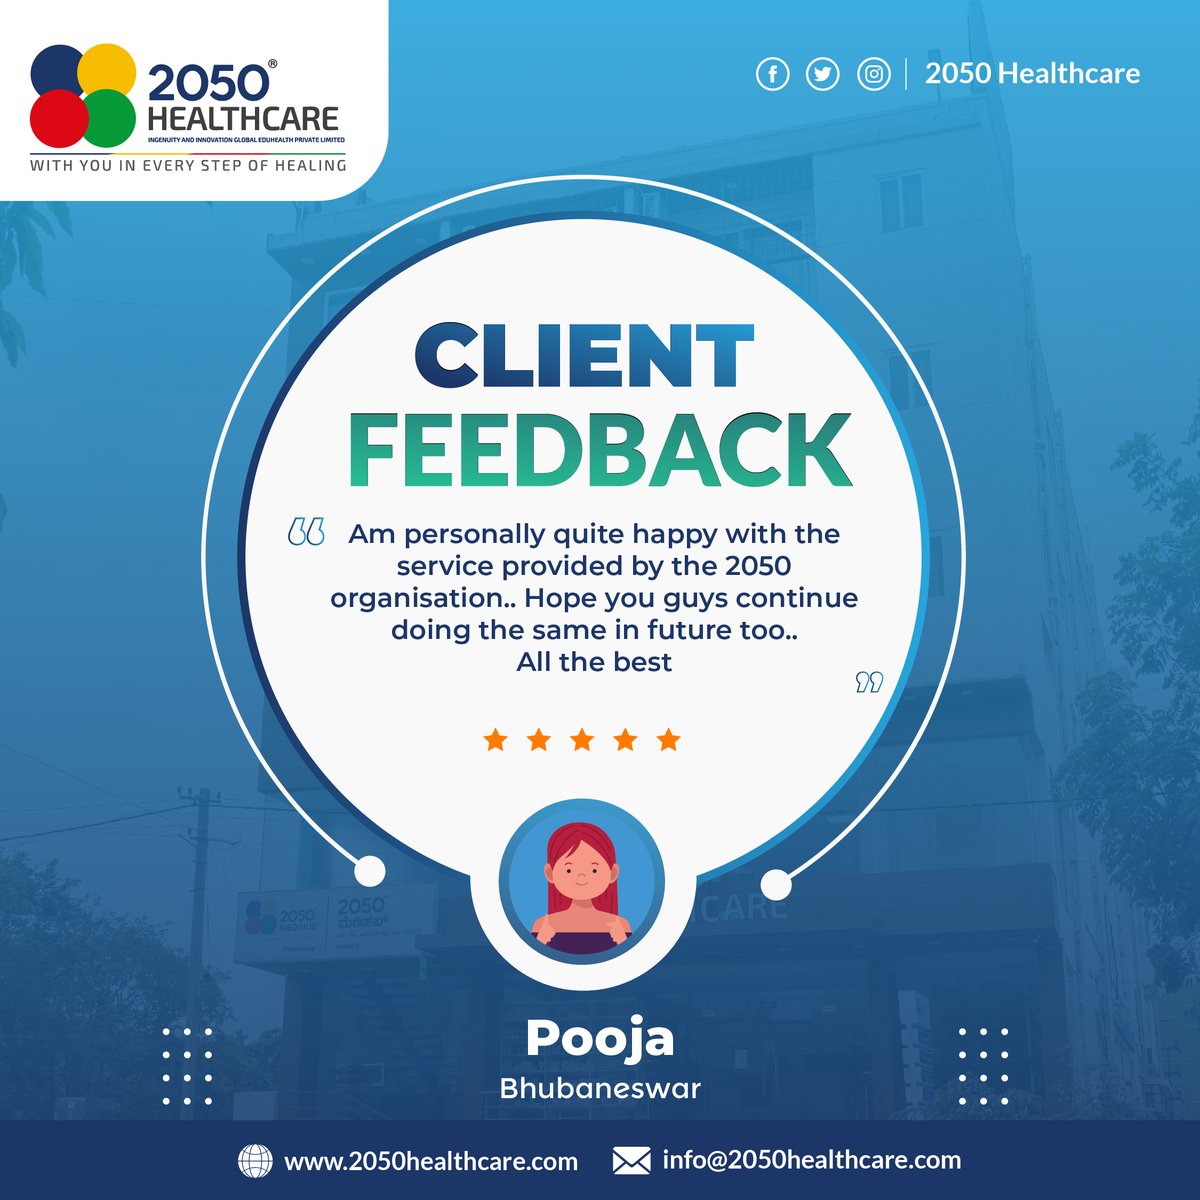 Thrilled to share some heartwarming feedback from our valued client! Thank you for choosing us, and we're honored to be part of your journey. Your satisfaction is our greatest achievement! 💙

#ClientFeedback #2050Healthcare #WithYouInEveryStepOfHealing